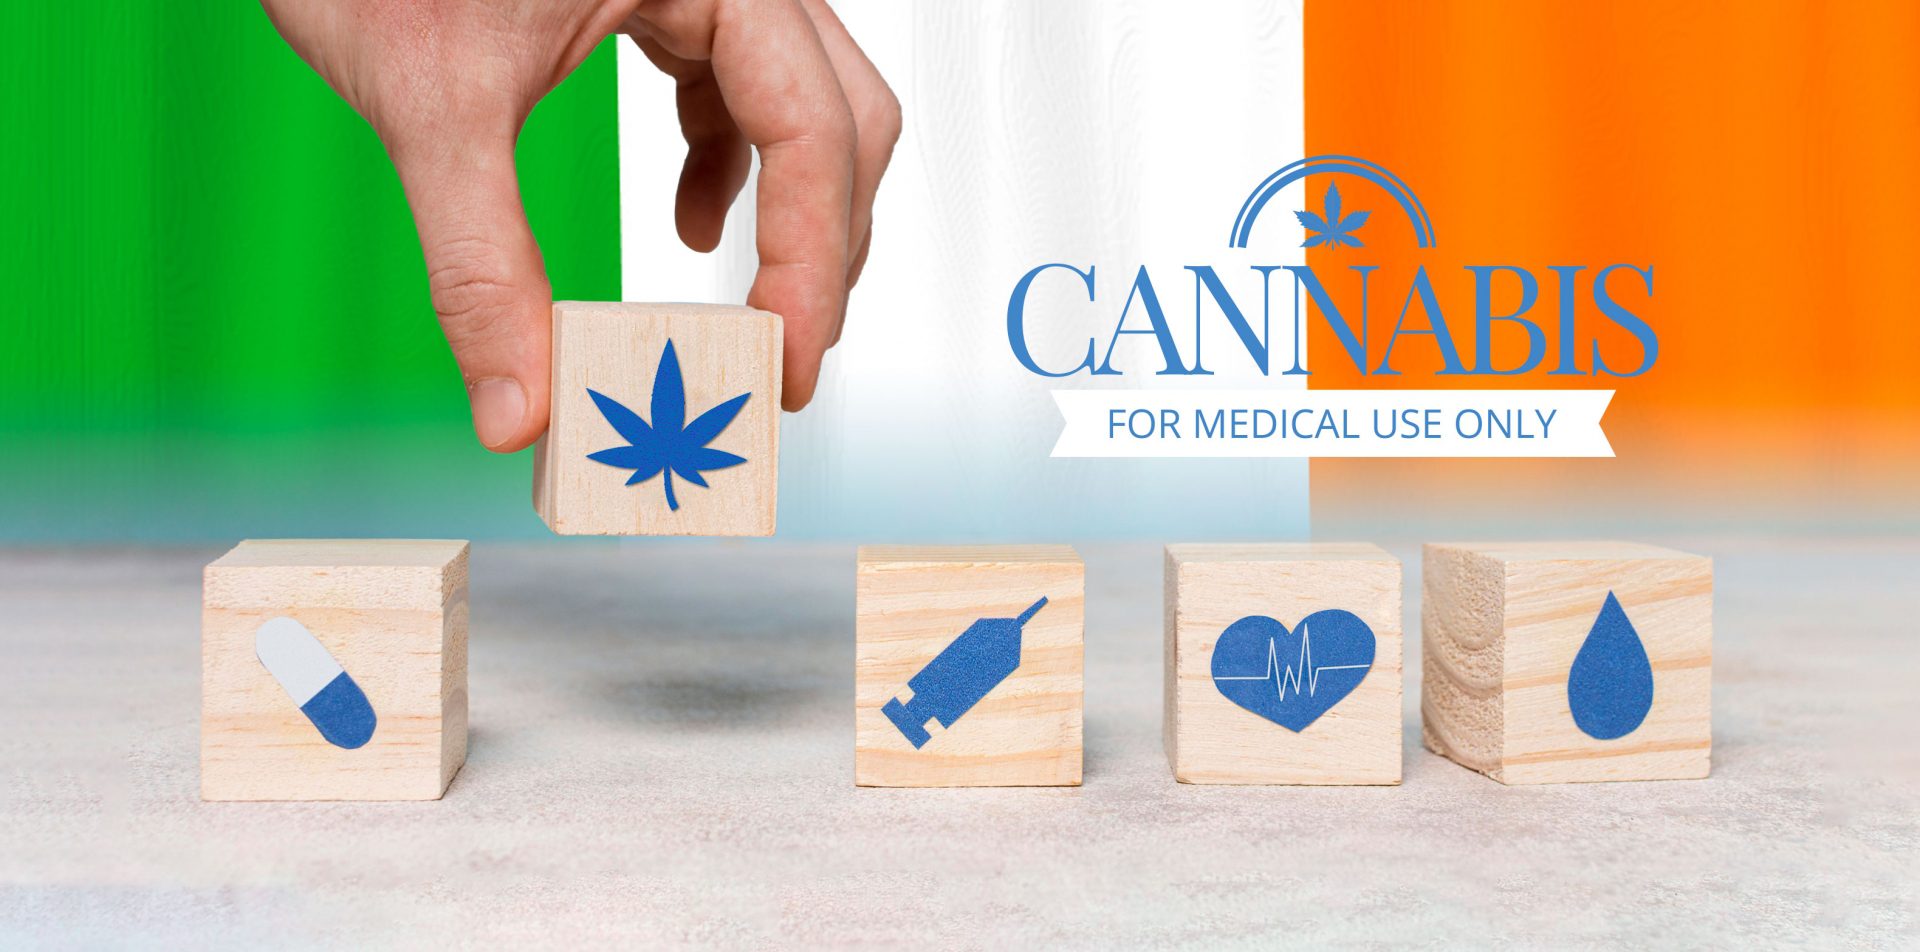 Ireland gives green light to medical cannabis with a prescription